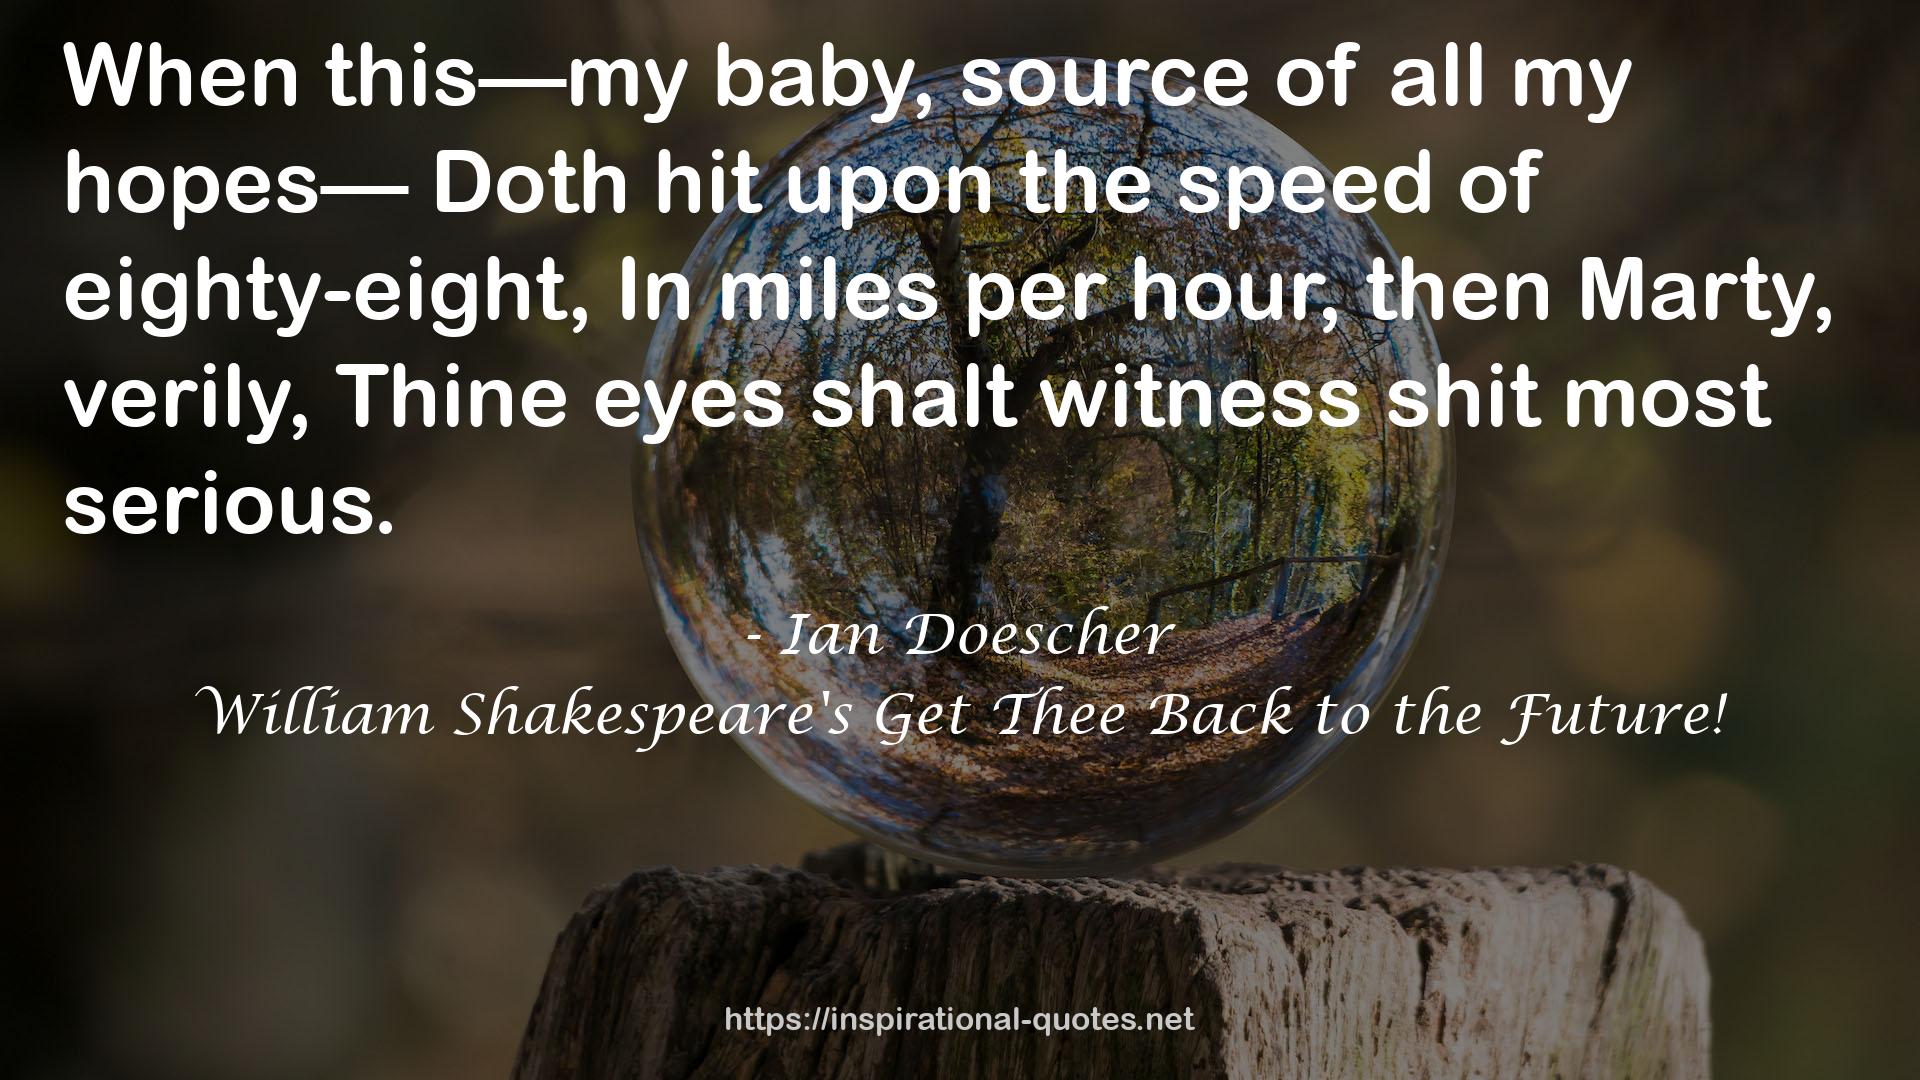 William Shakespeare's Get Thee Back to the Future! QUOTES